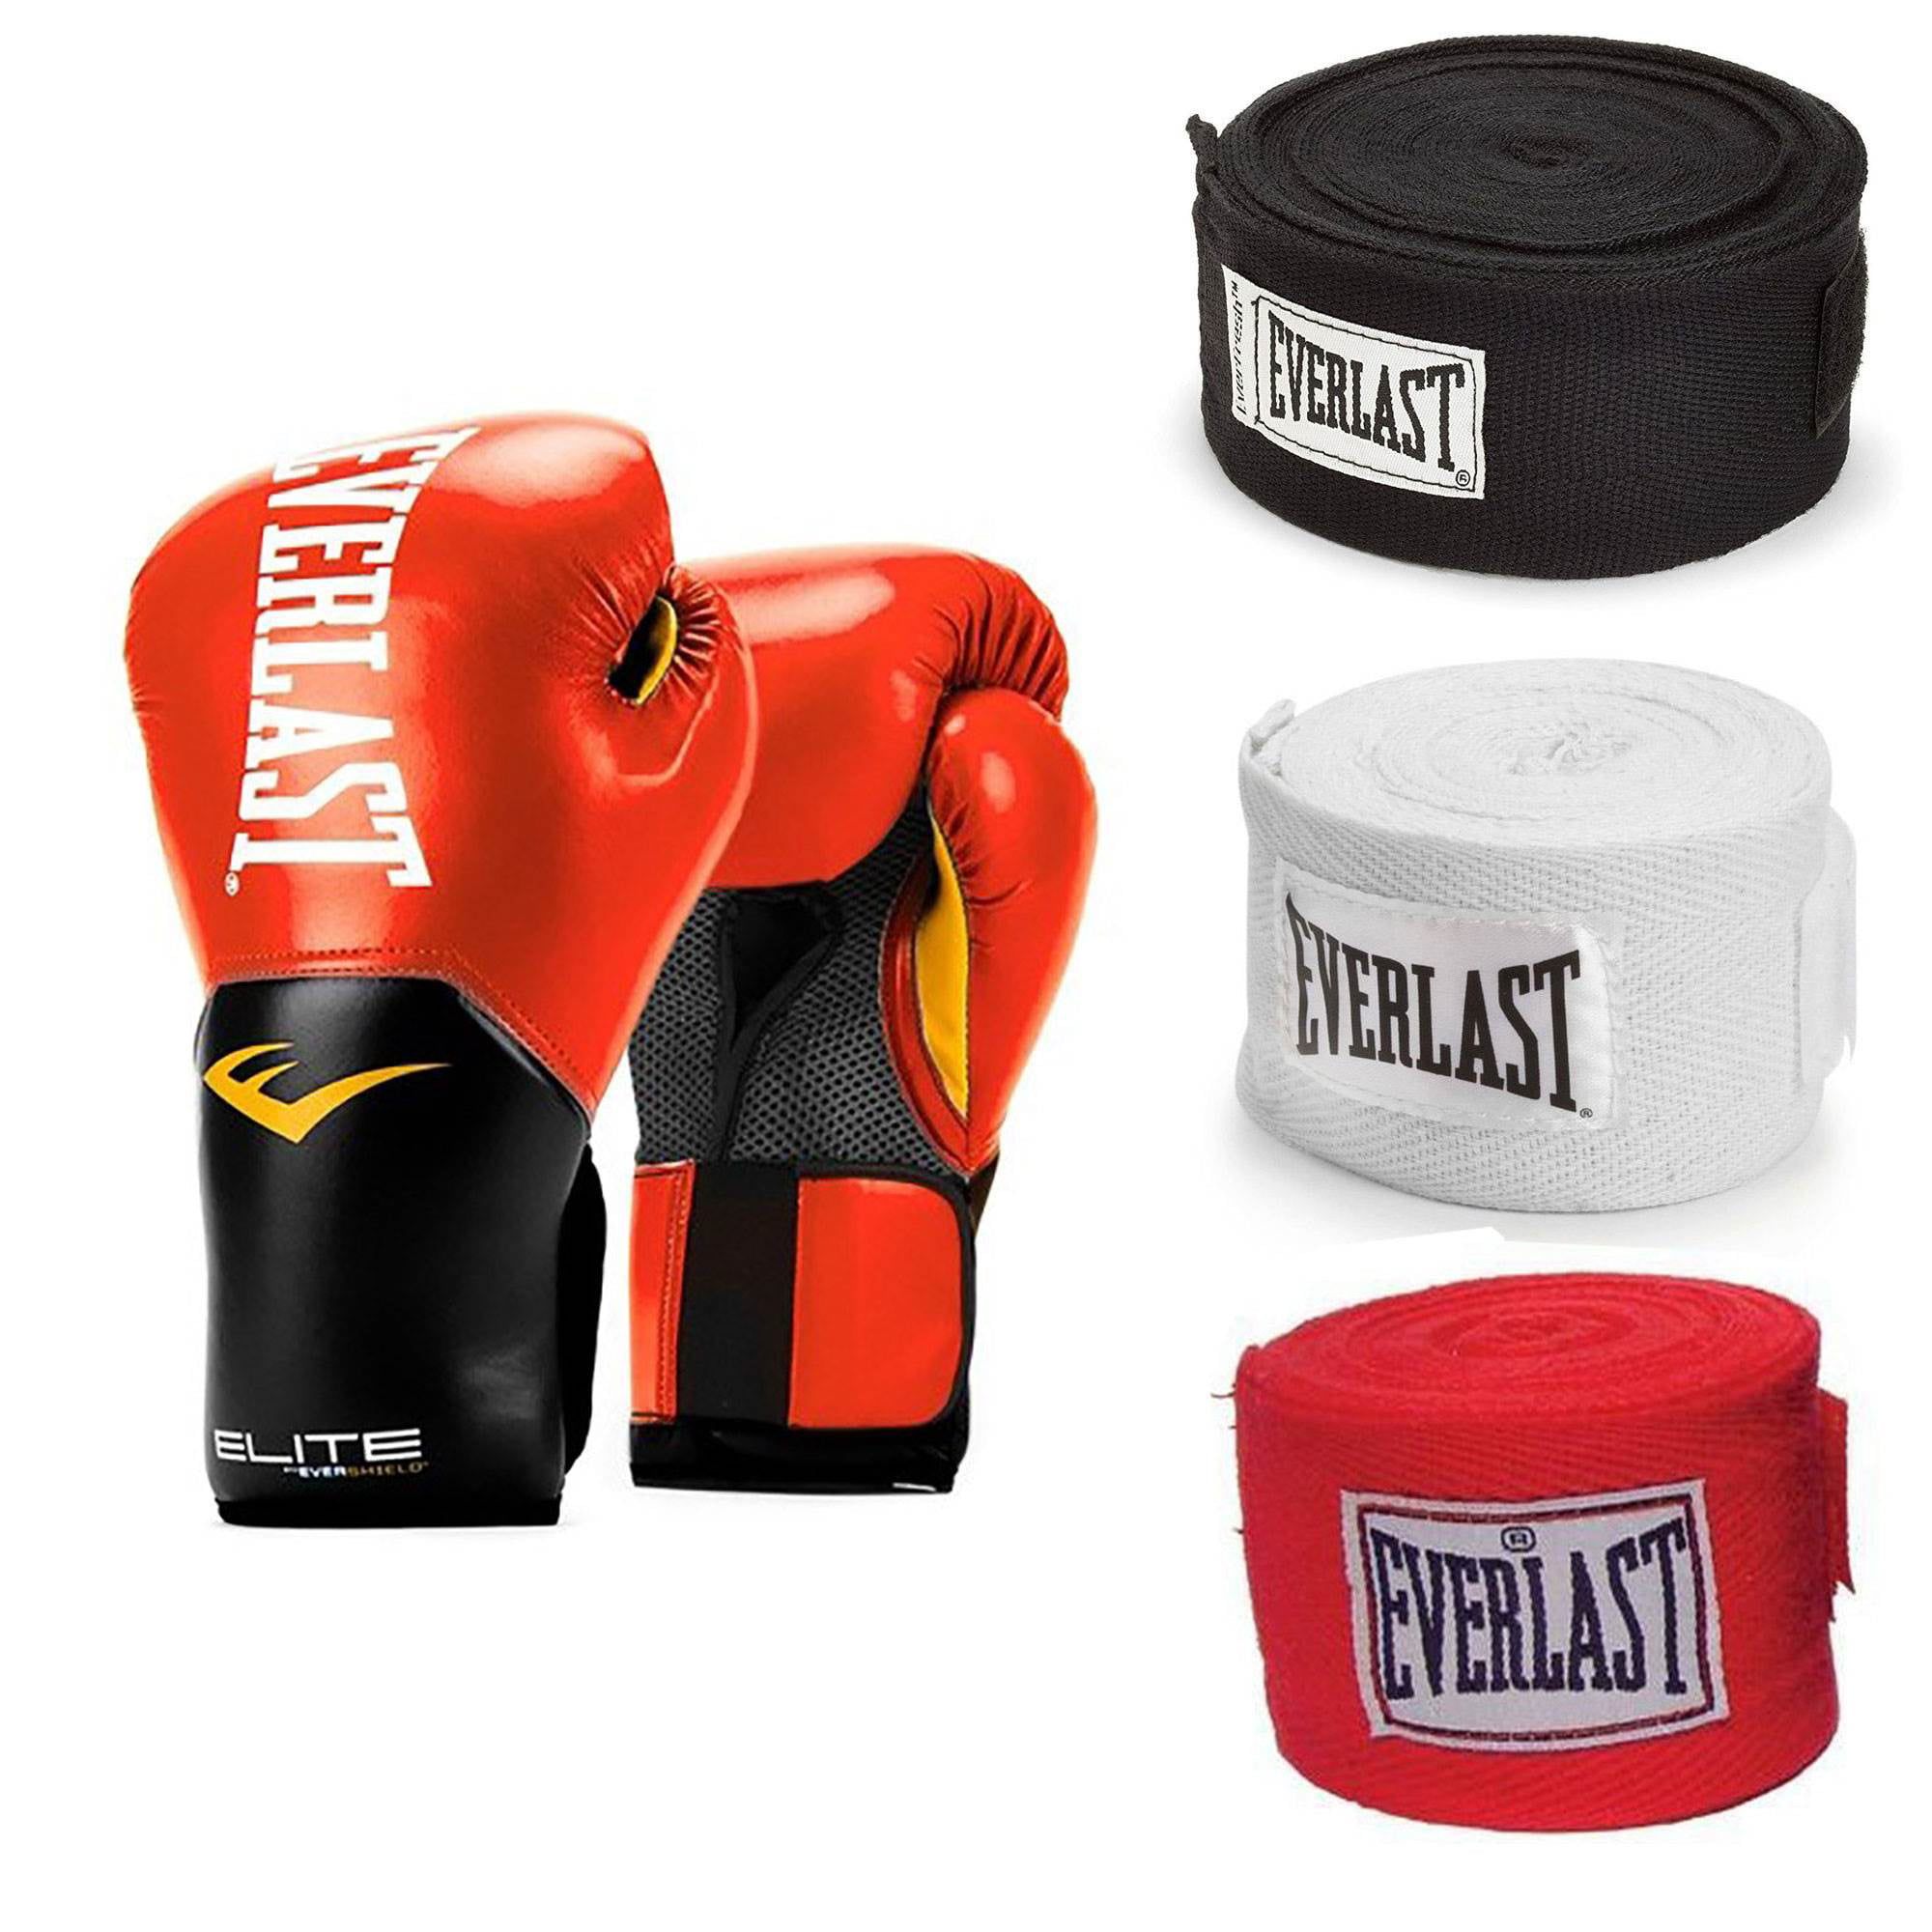 Everlast Elite Pro Style Training Pink Boxing Gloves Leather Size 8 Ounces for sale online 